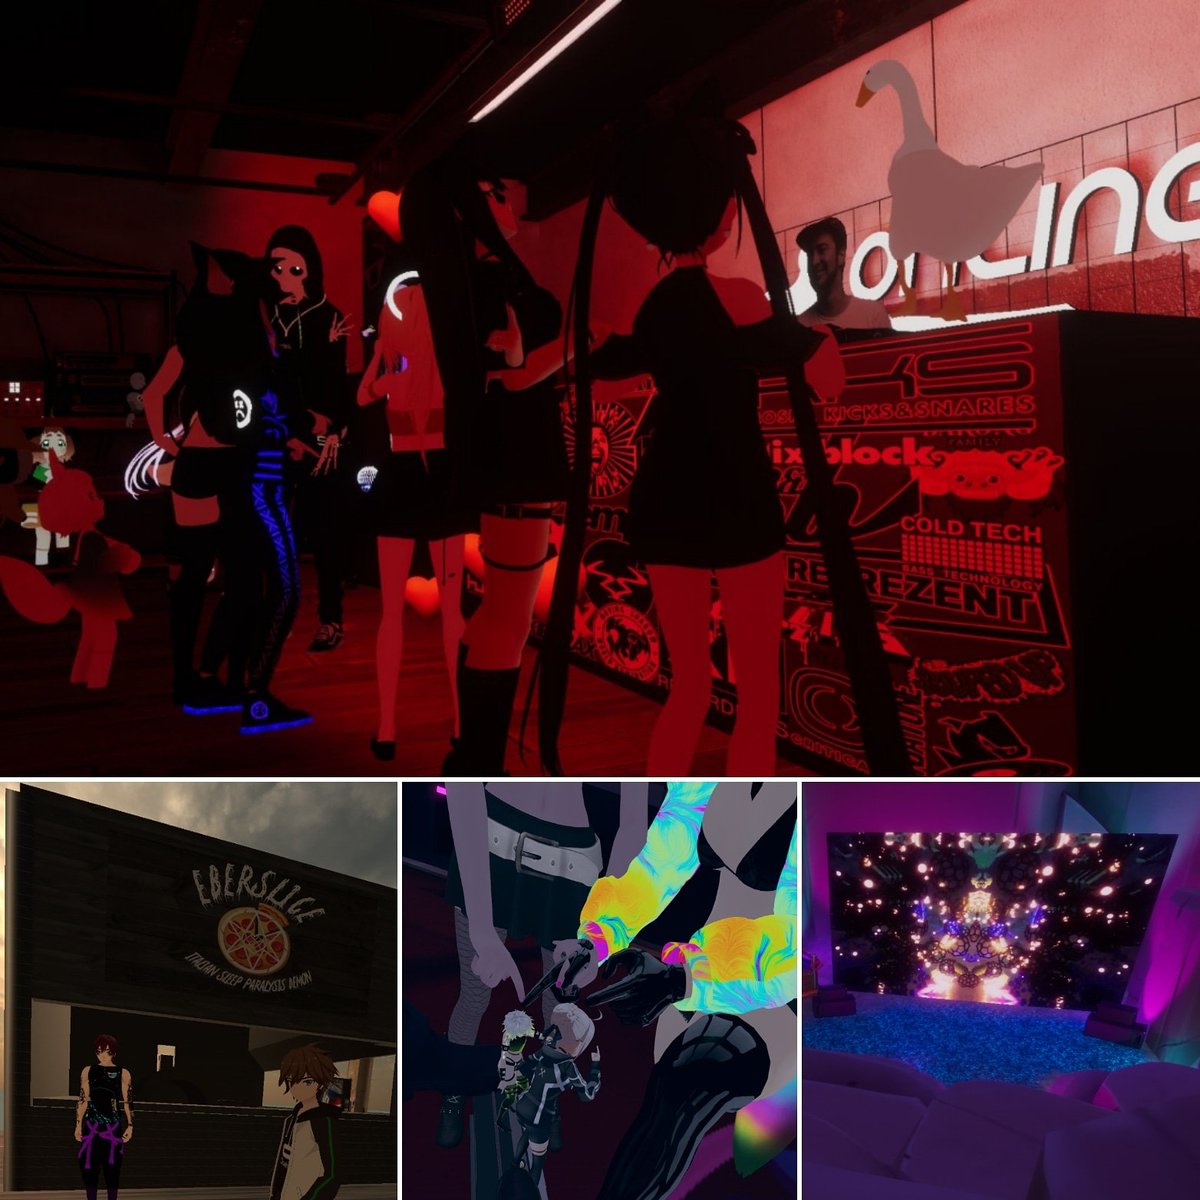 Goosing it up @Loner_Online to a set by @Murder_He_Wrote.

Grabbing a slice of @eberstarkmusic pizza @ragehauz.

Headbanging with feet up @rizumuvr.

Tripping out to @microdoseVR visuals at a DJ set by @Dissolv

Just @vrchat things, I 💖 this place!

#VR #vrchat